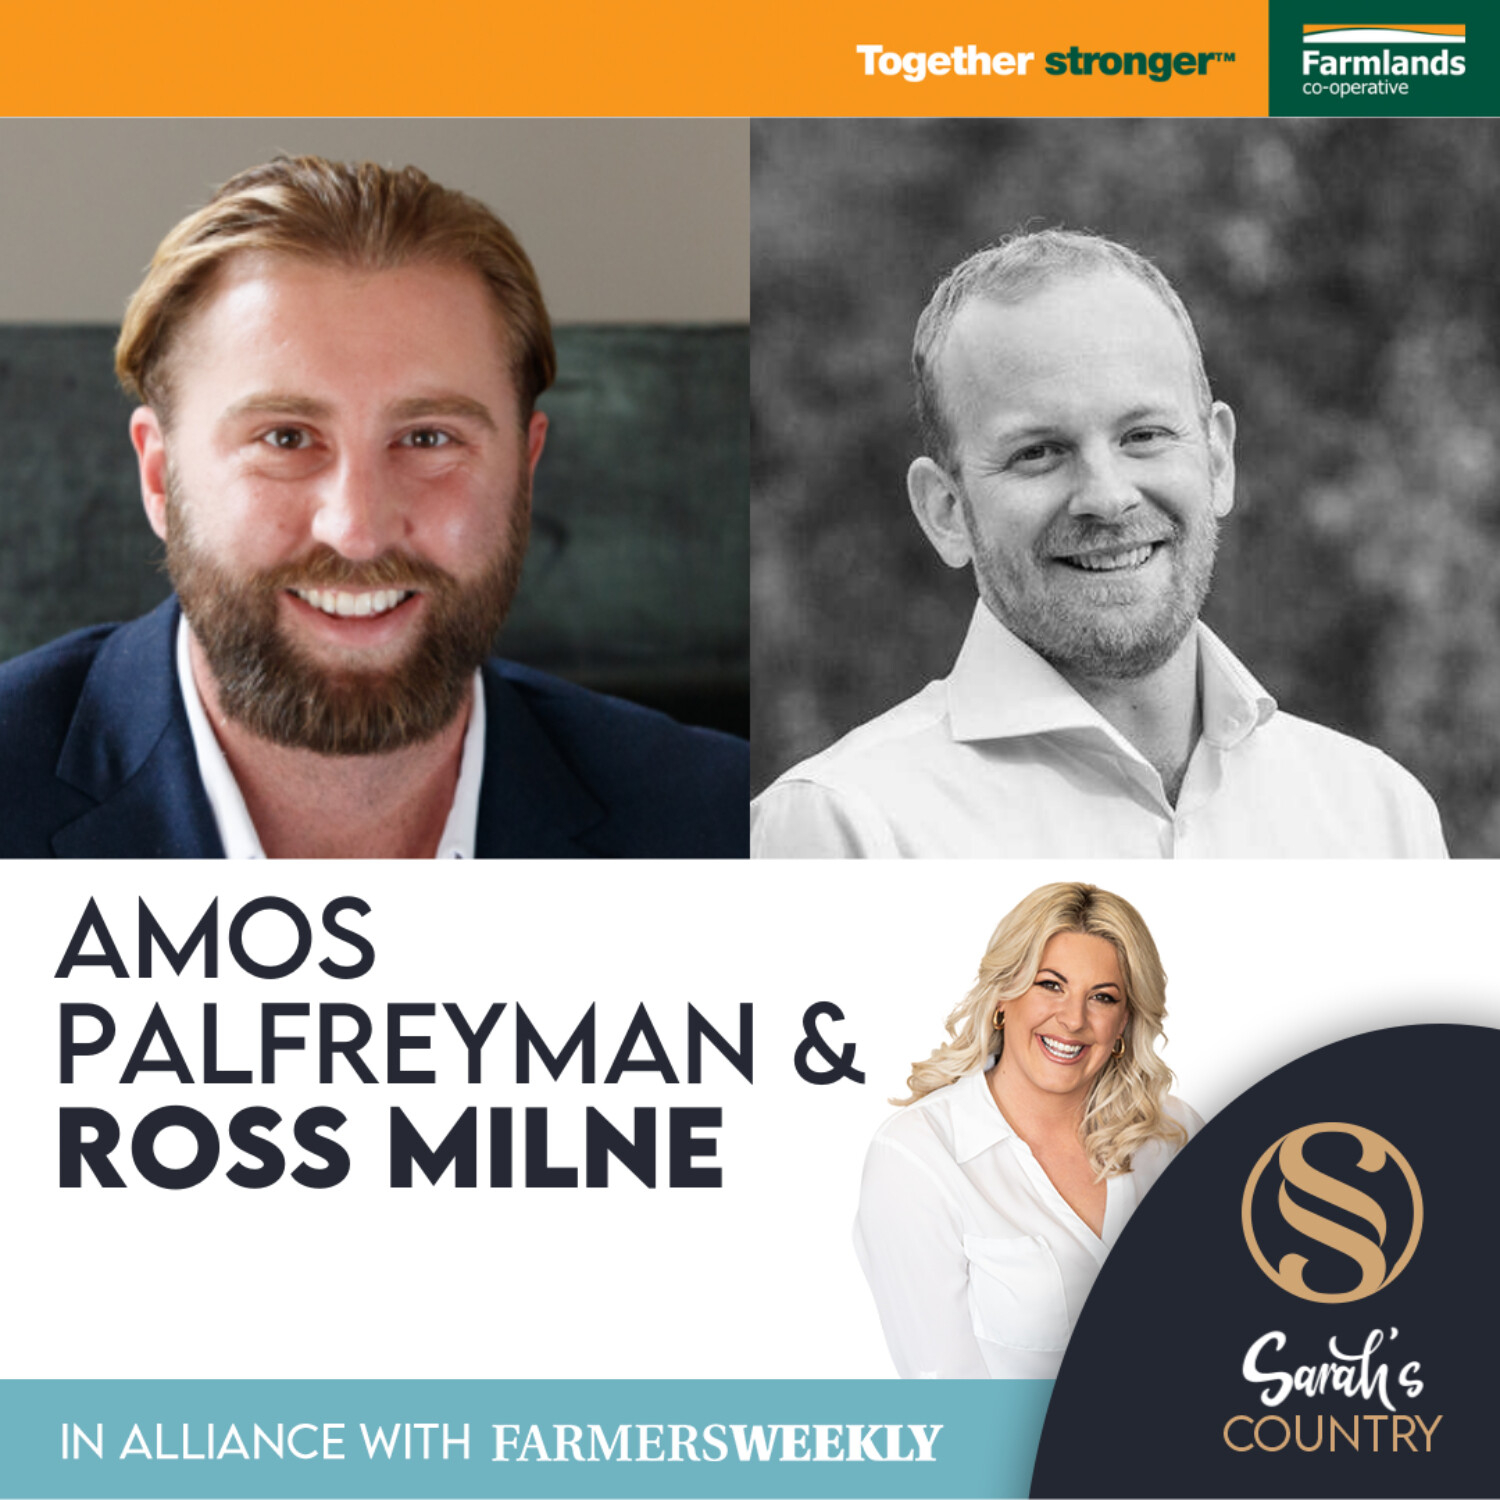 Amos Palfreyman & Ross Milne | “The future of food is now”